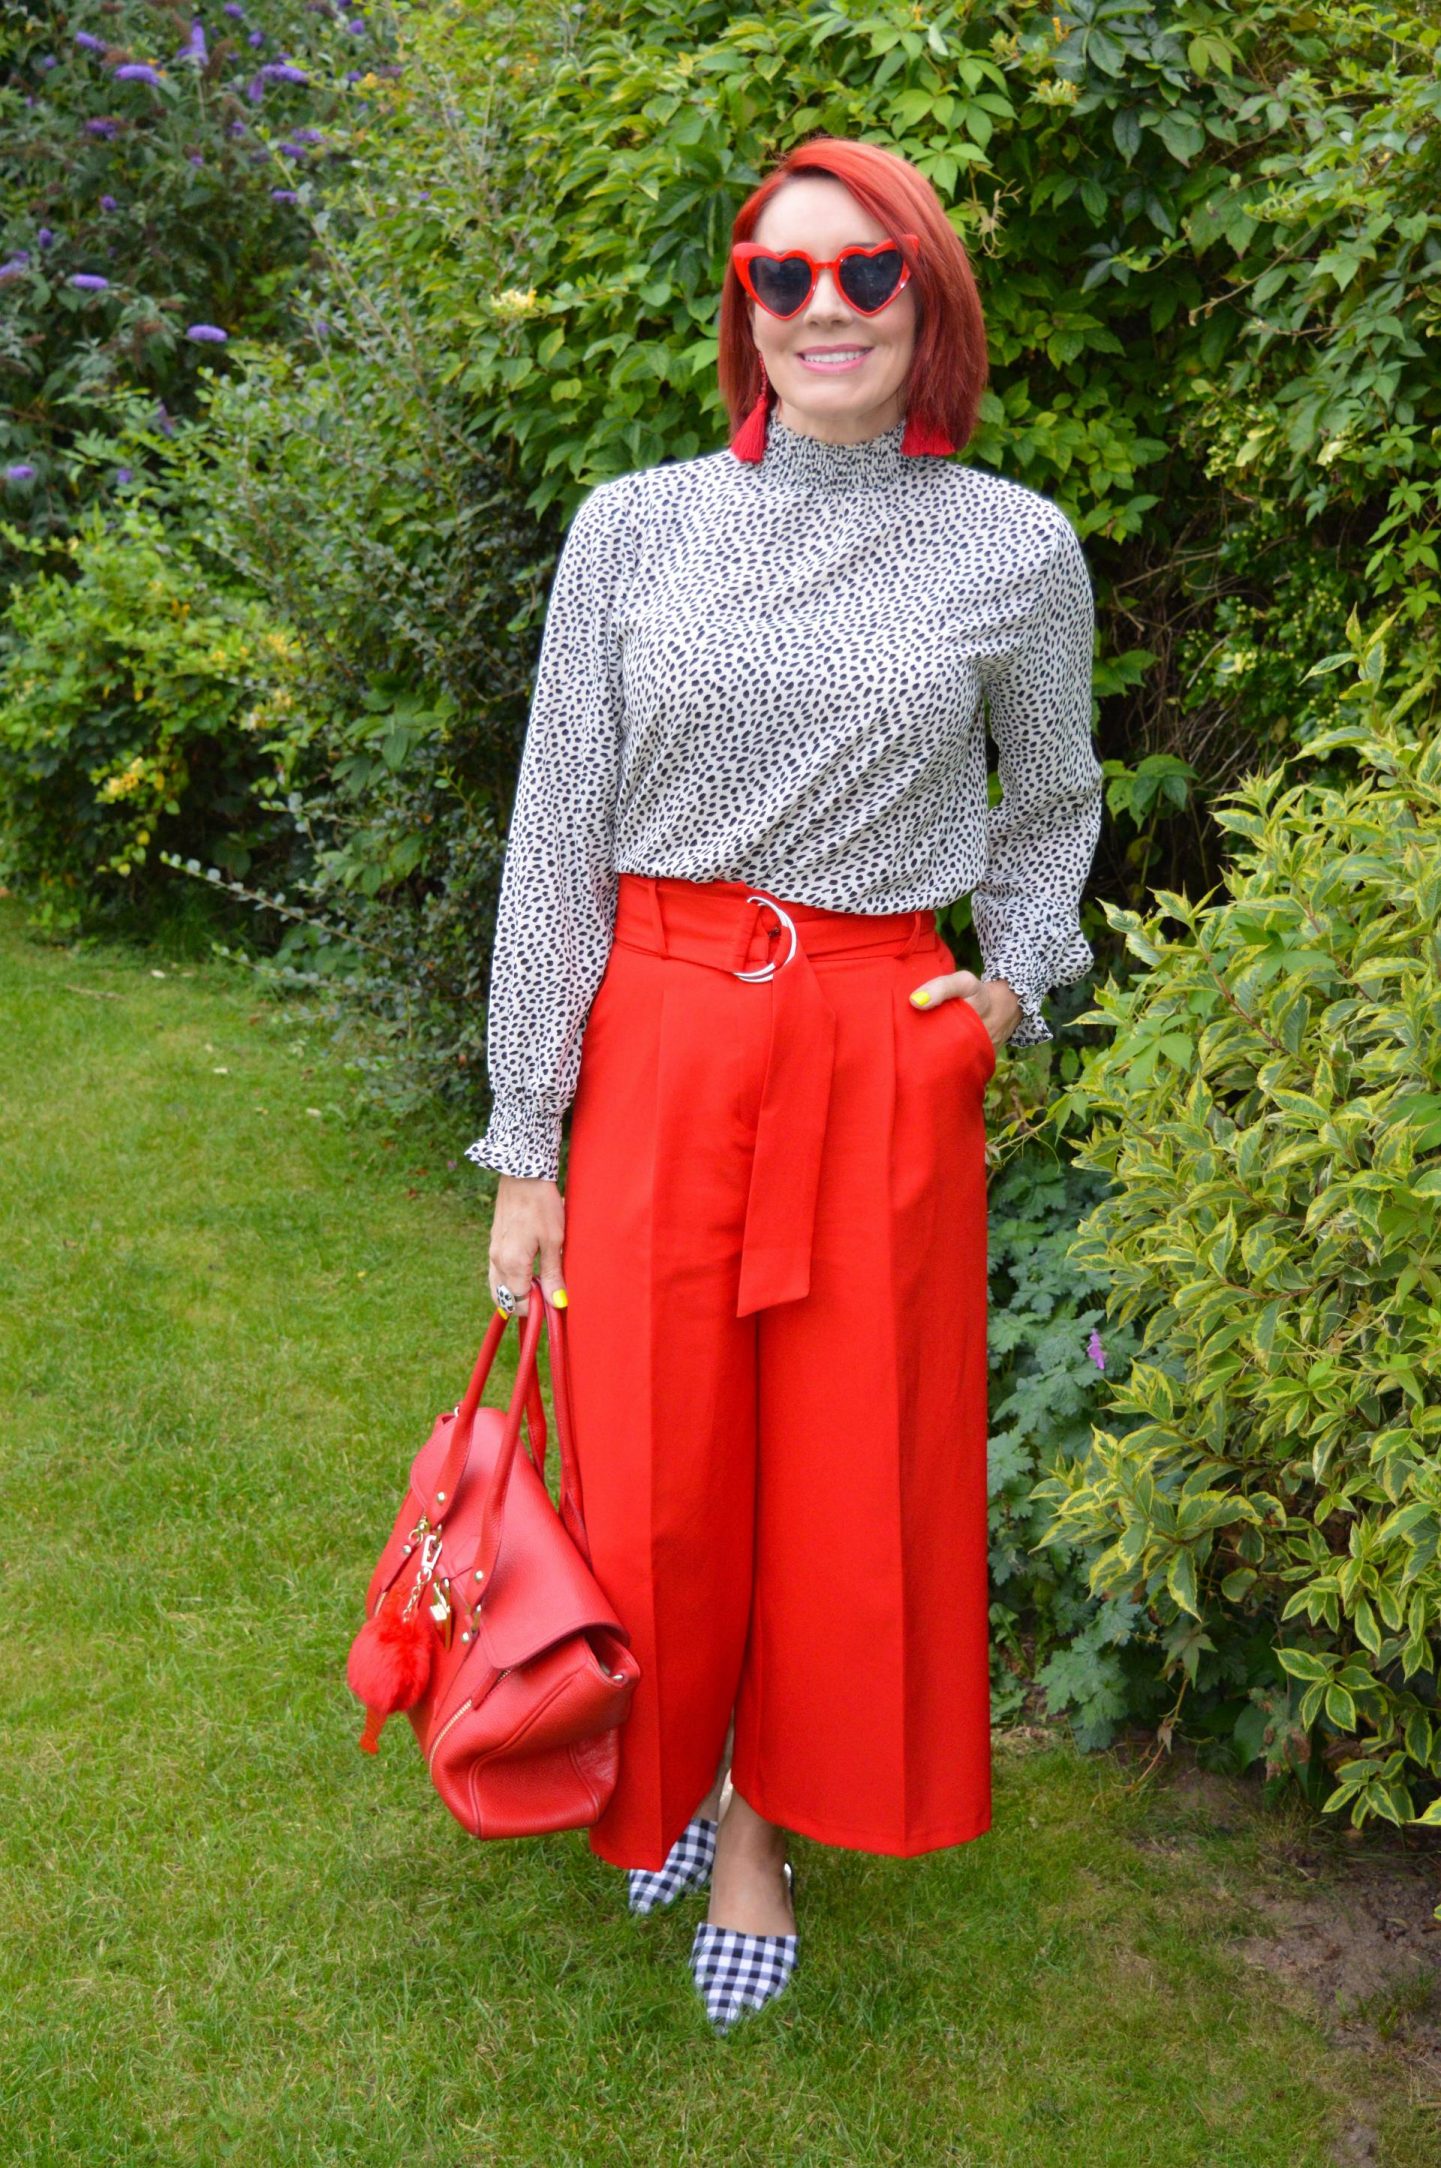 Black and White Spot Blouse With Red Culottes, Coast black and white spotted shirred neck top, Asos red culottes, Asos gingham mules